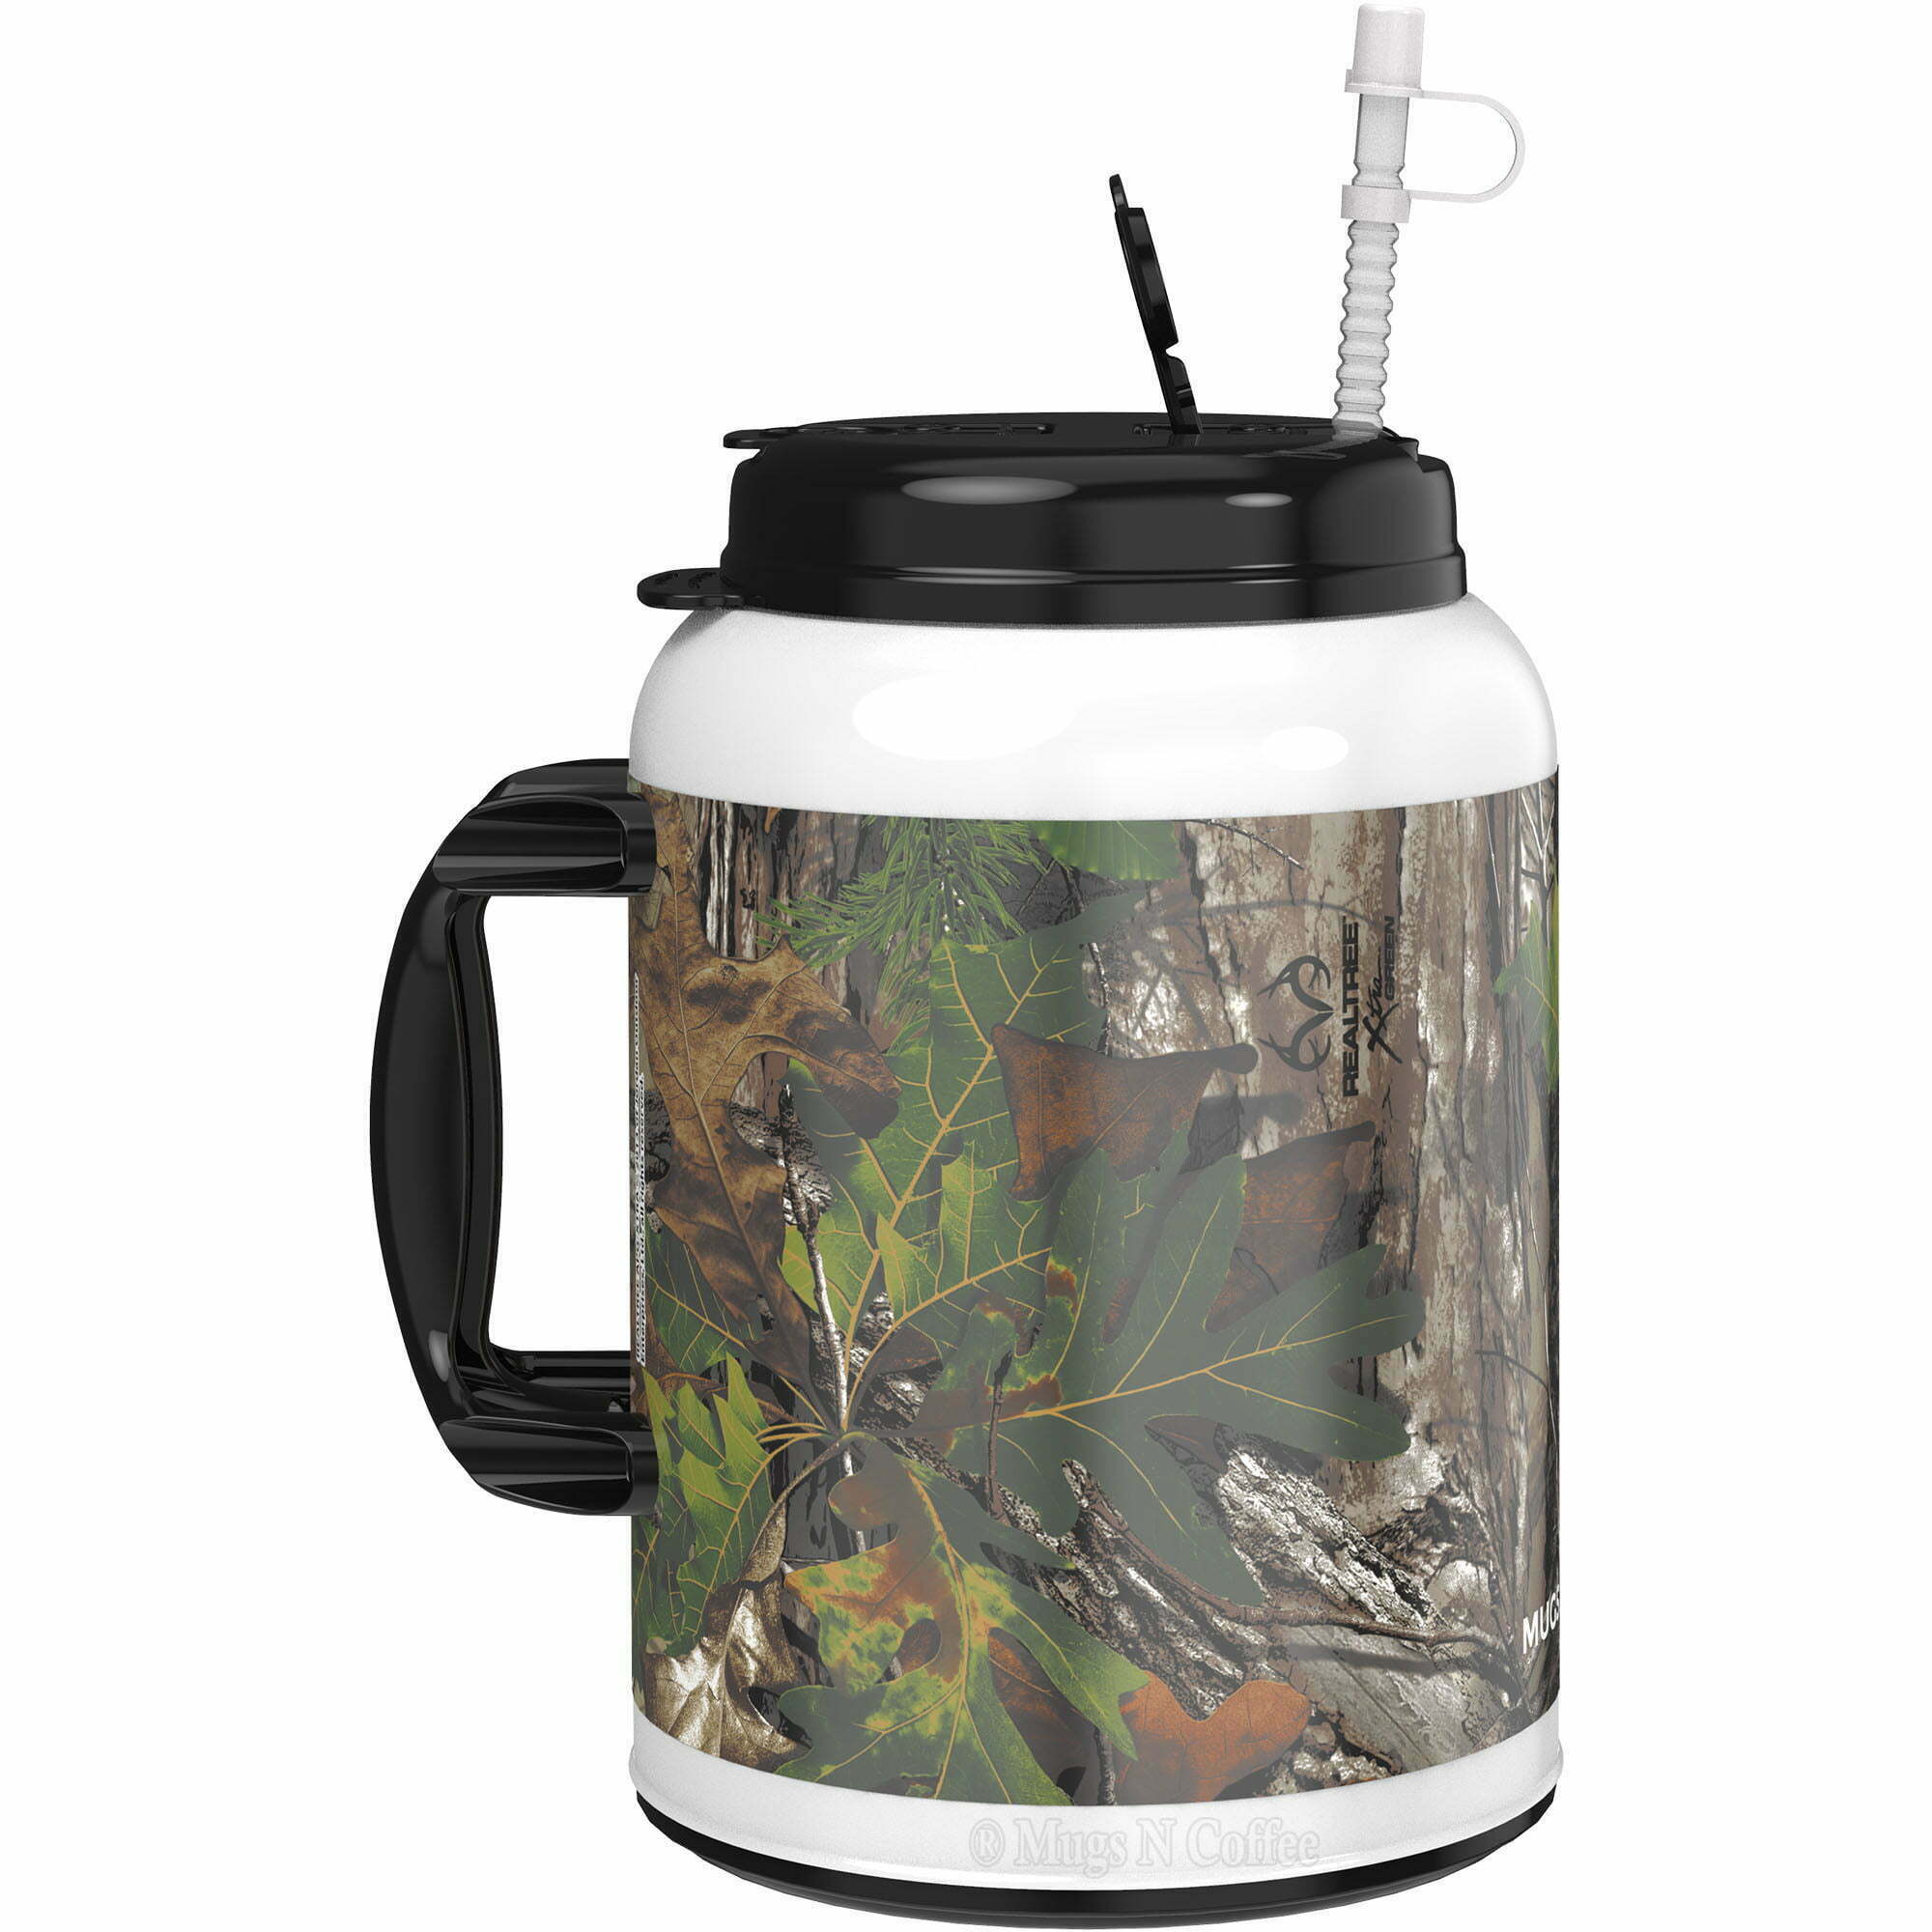 Camo Travel Mug, Hiding in Desert Camo, Steel Thermal Cup, 16 oz, by  Ambesonne